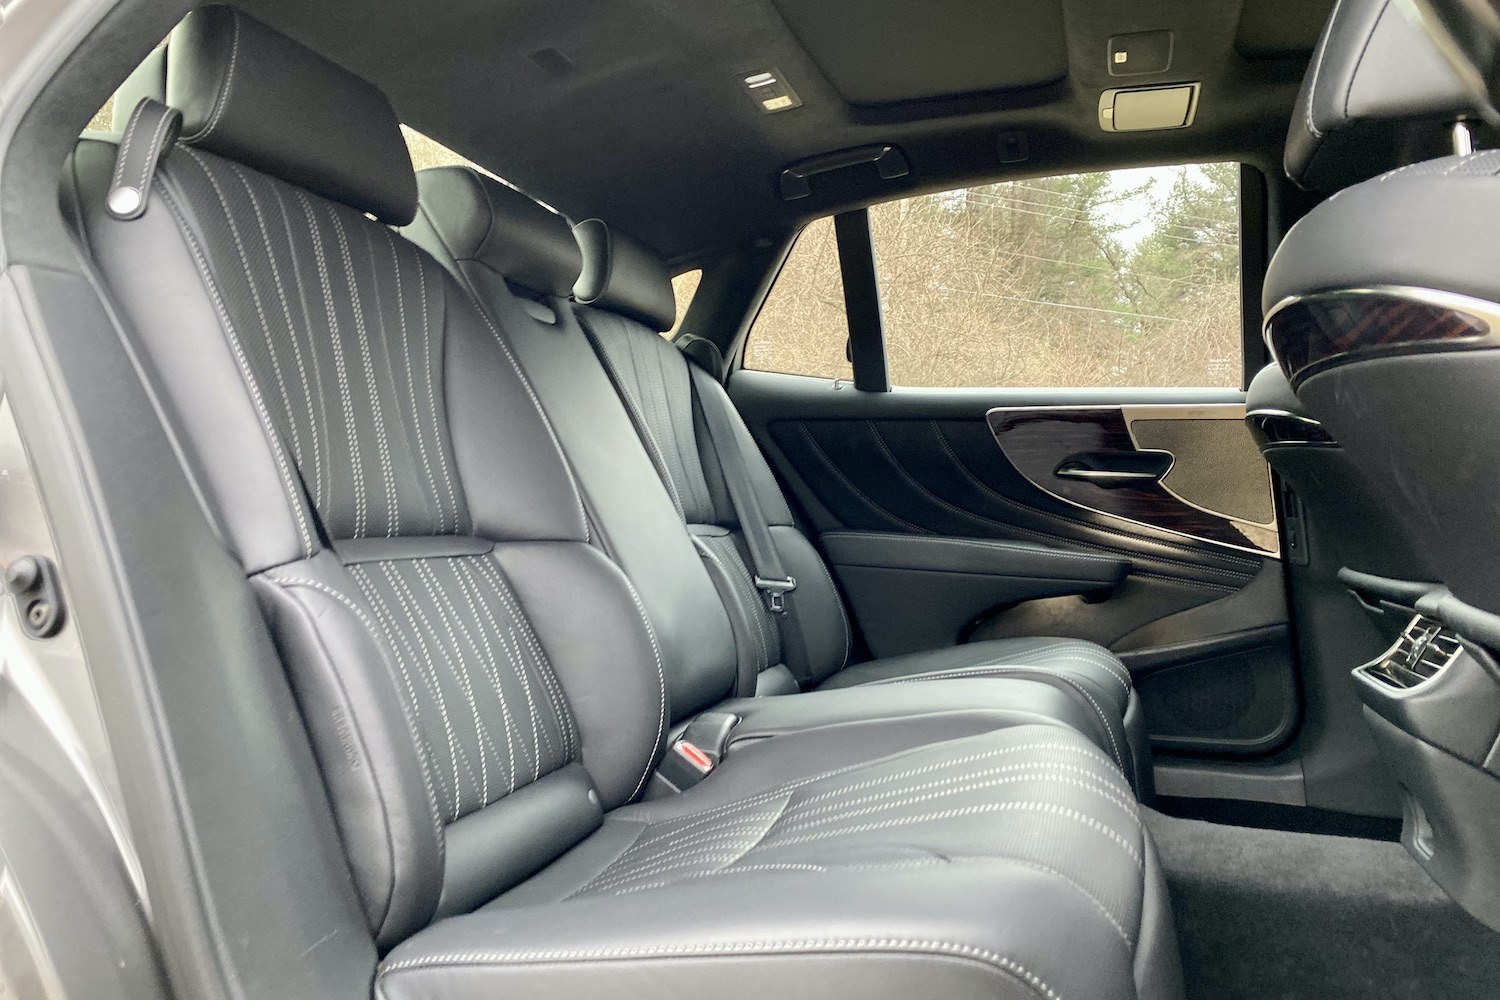 The plush rear seats in the 2021 Lexus LS500 from outside with trees in the back.